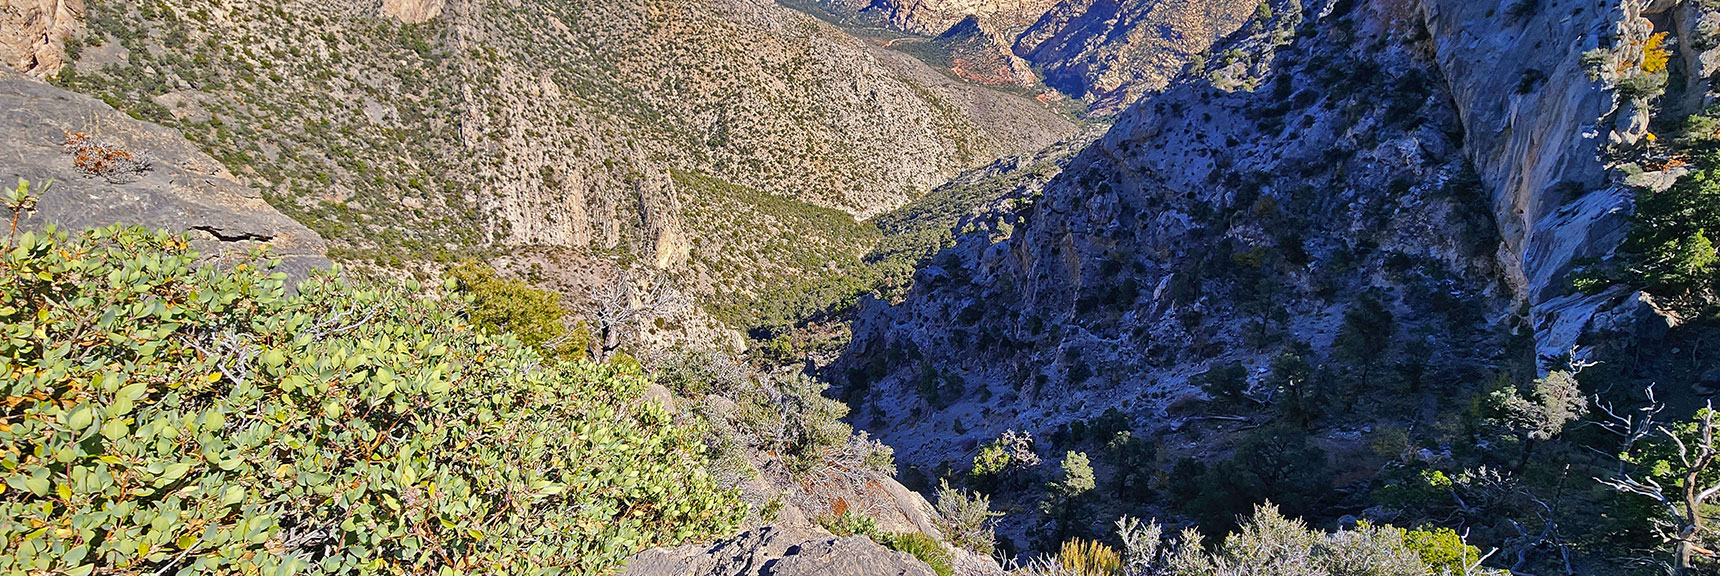 Descent Route Channeling into Switchback Spring Canyon, Then Down to Rocky Gap Rd. | Switchback Spring Pinnacle | Wilson Ridge | Lovell Canyon, Nevada